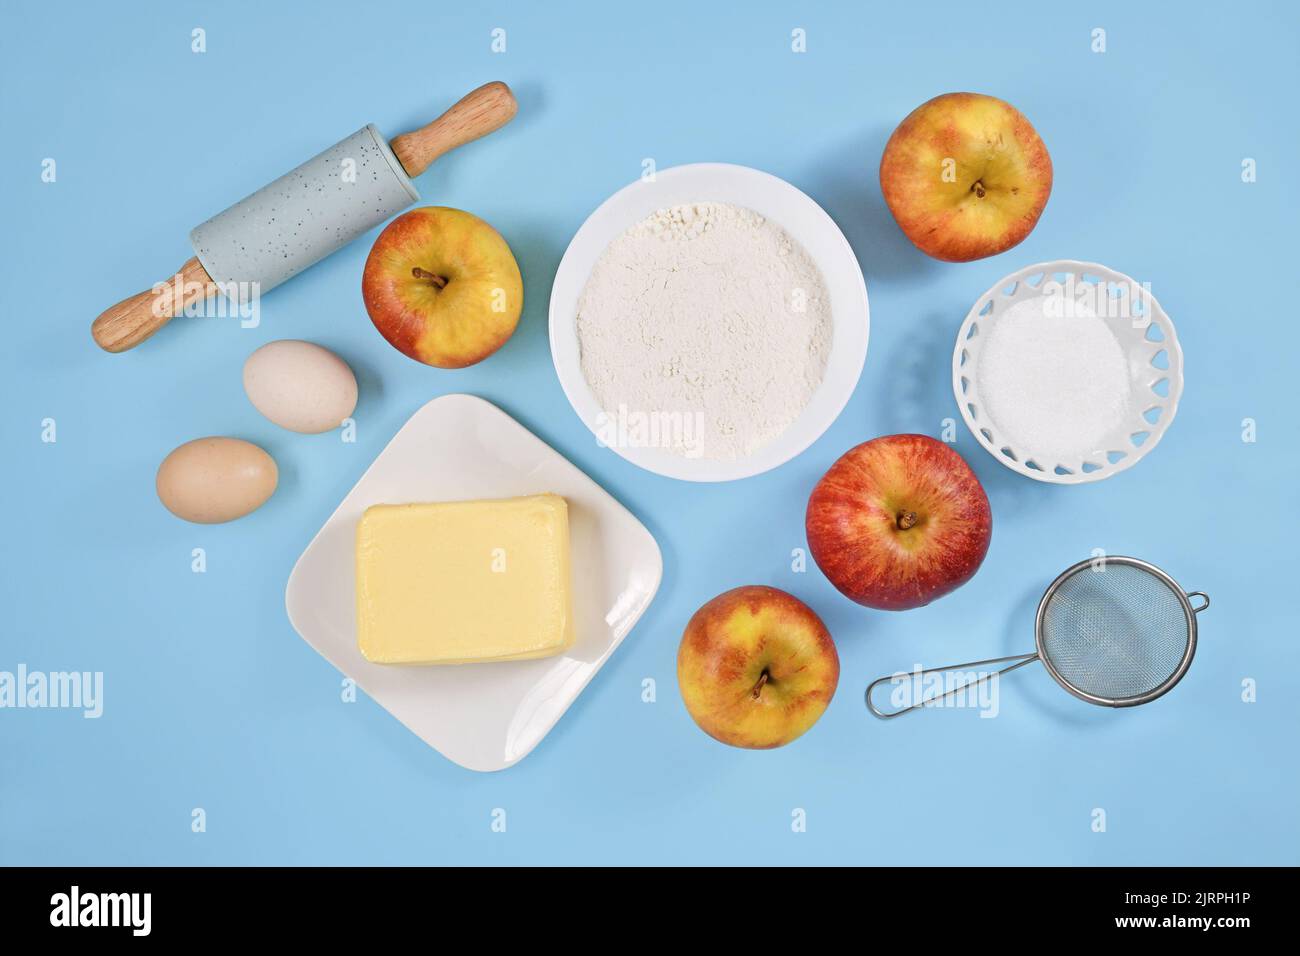 Baking ingredients for apple pie with butter, flour, sugar, eggs and fruits on blue background Stock Photo